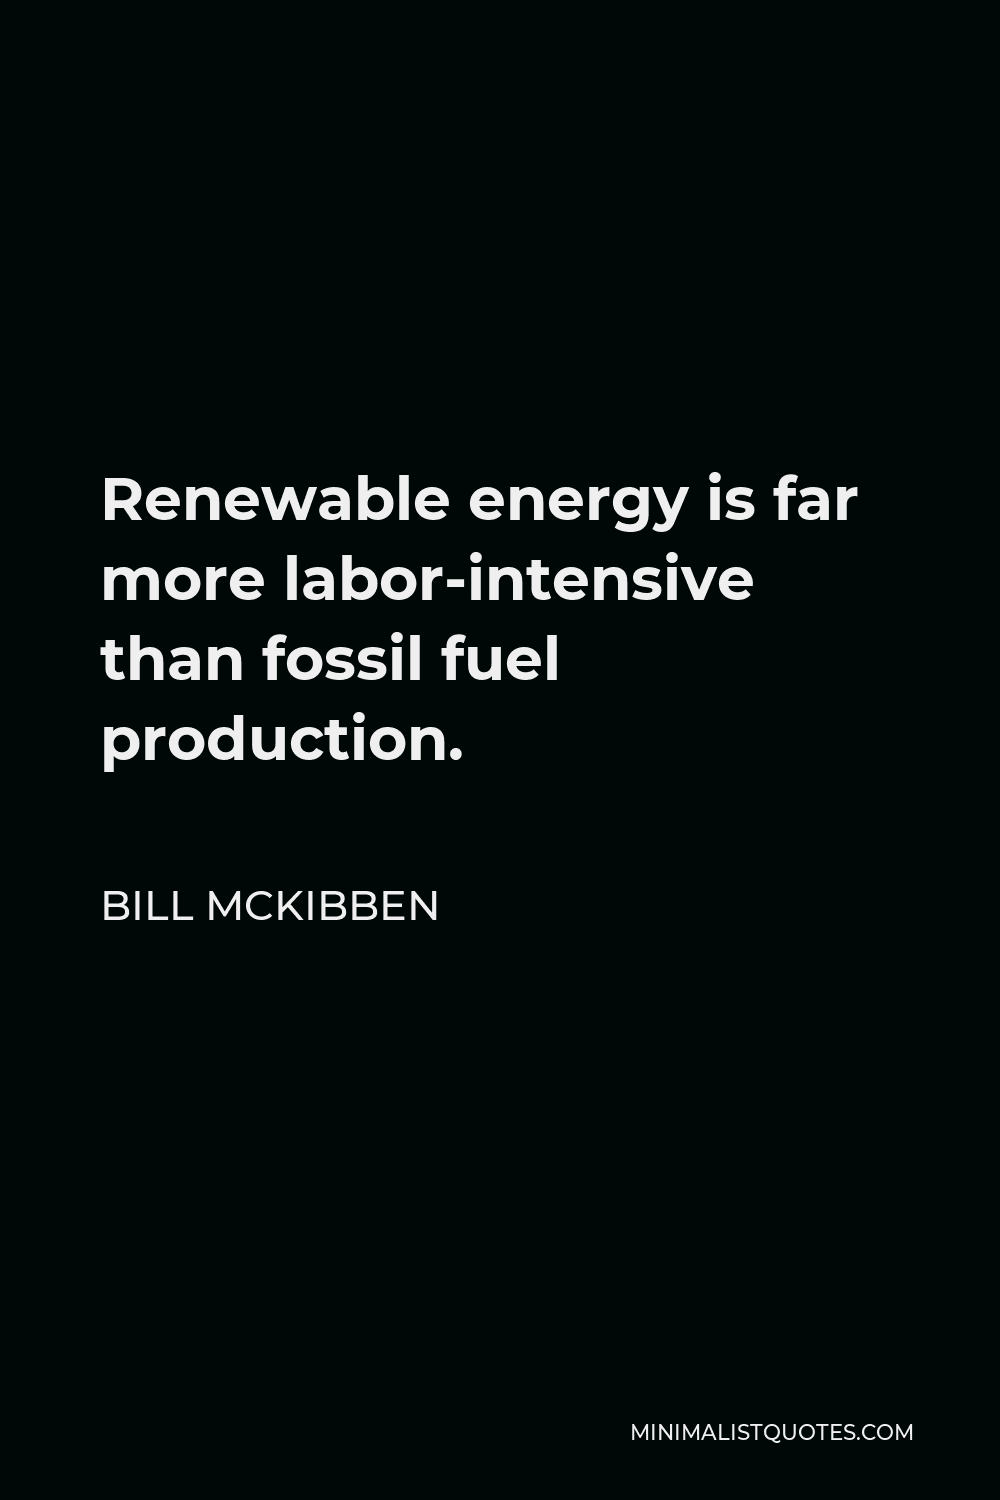 Bill McKibben Quote - Renewable energy is far more labor-intensive than fossil fuel production.